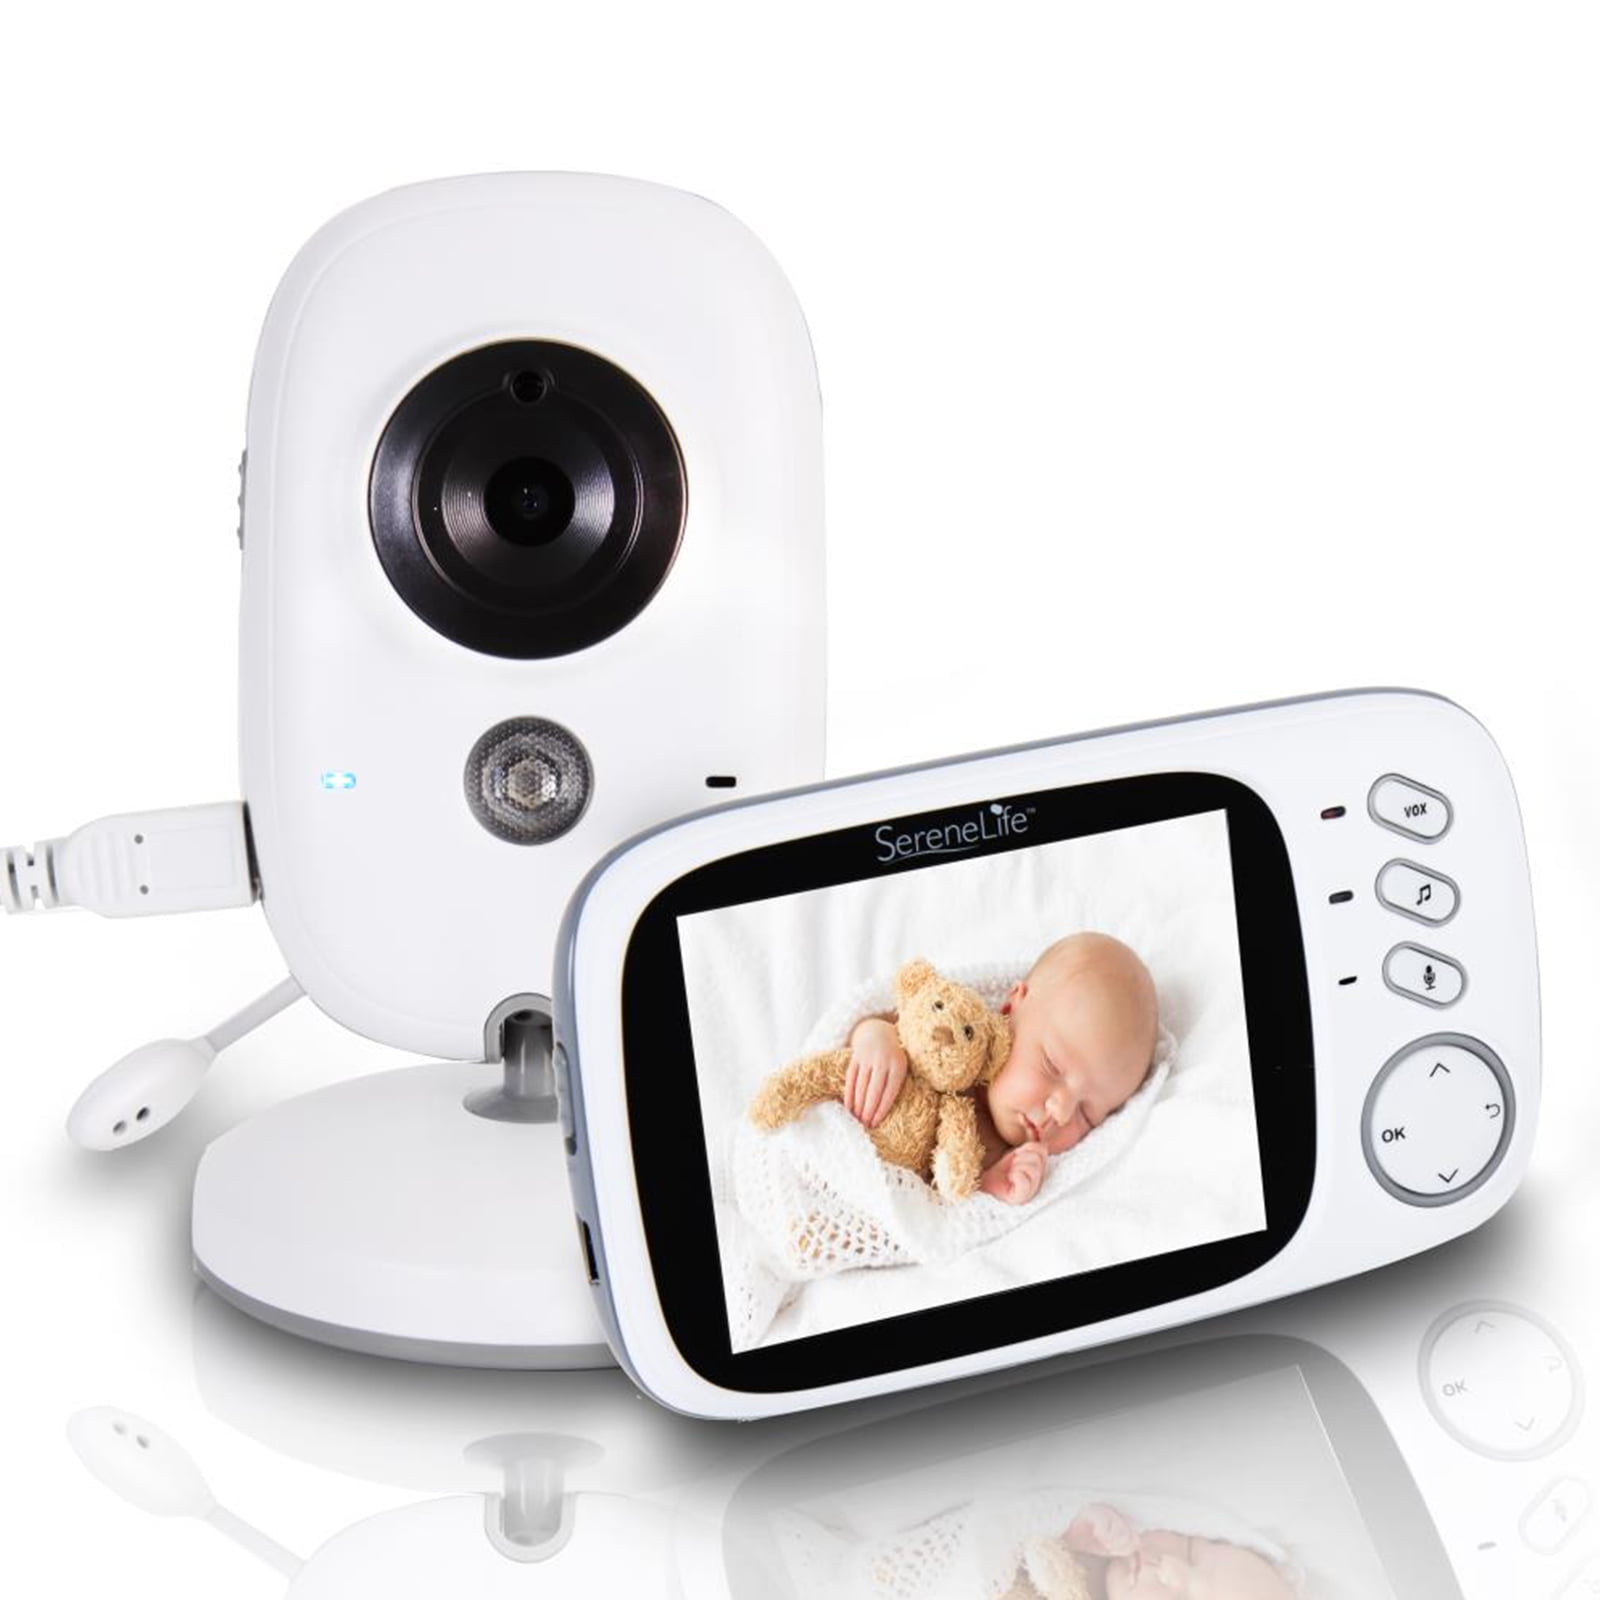 SereneLife SLBCAM20 - Wireless Baby Monitor System - Child Home Monitoring Camera & Portable Video Display System - BrickSeek